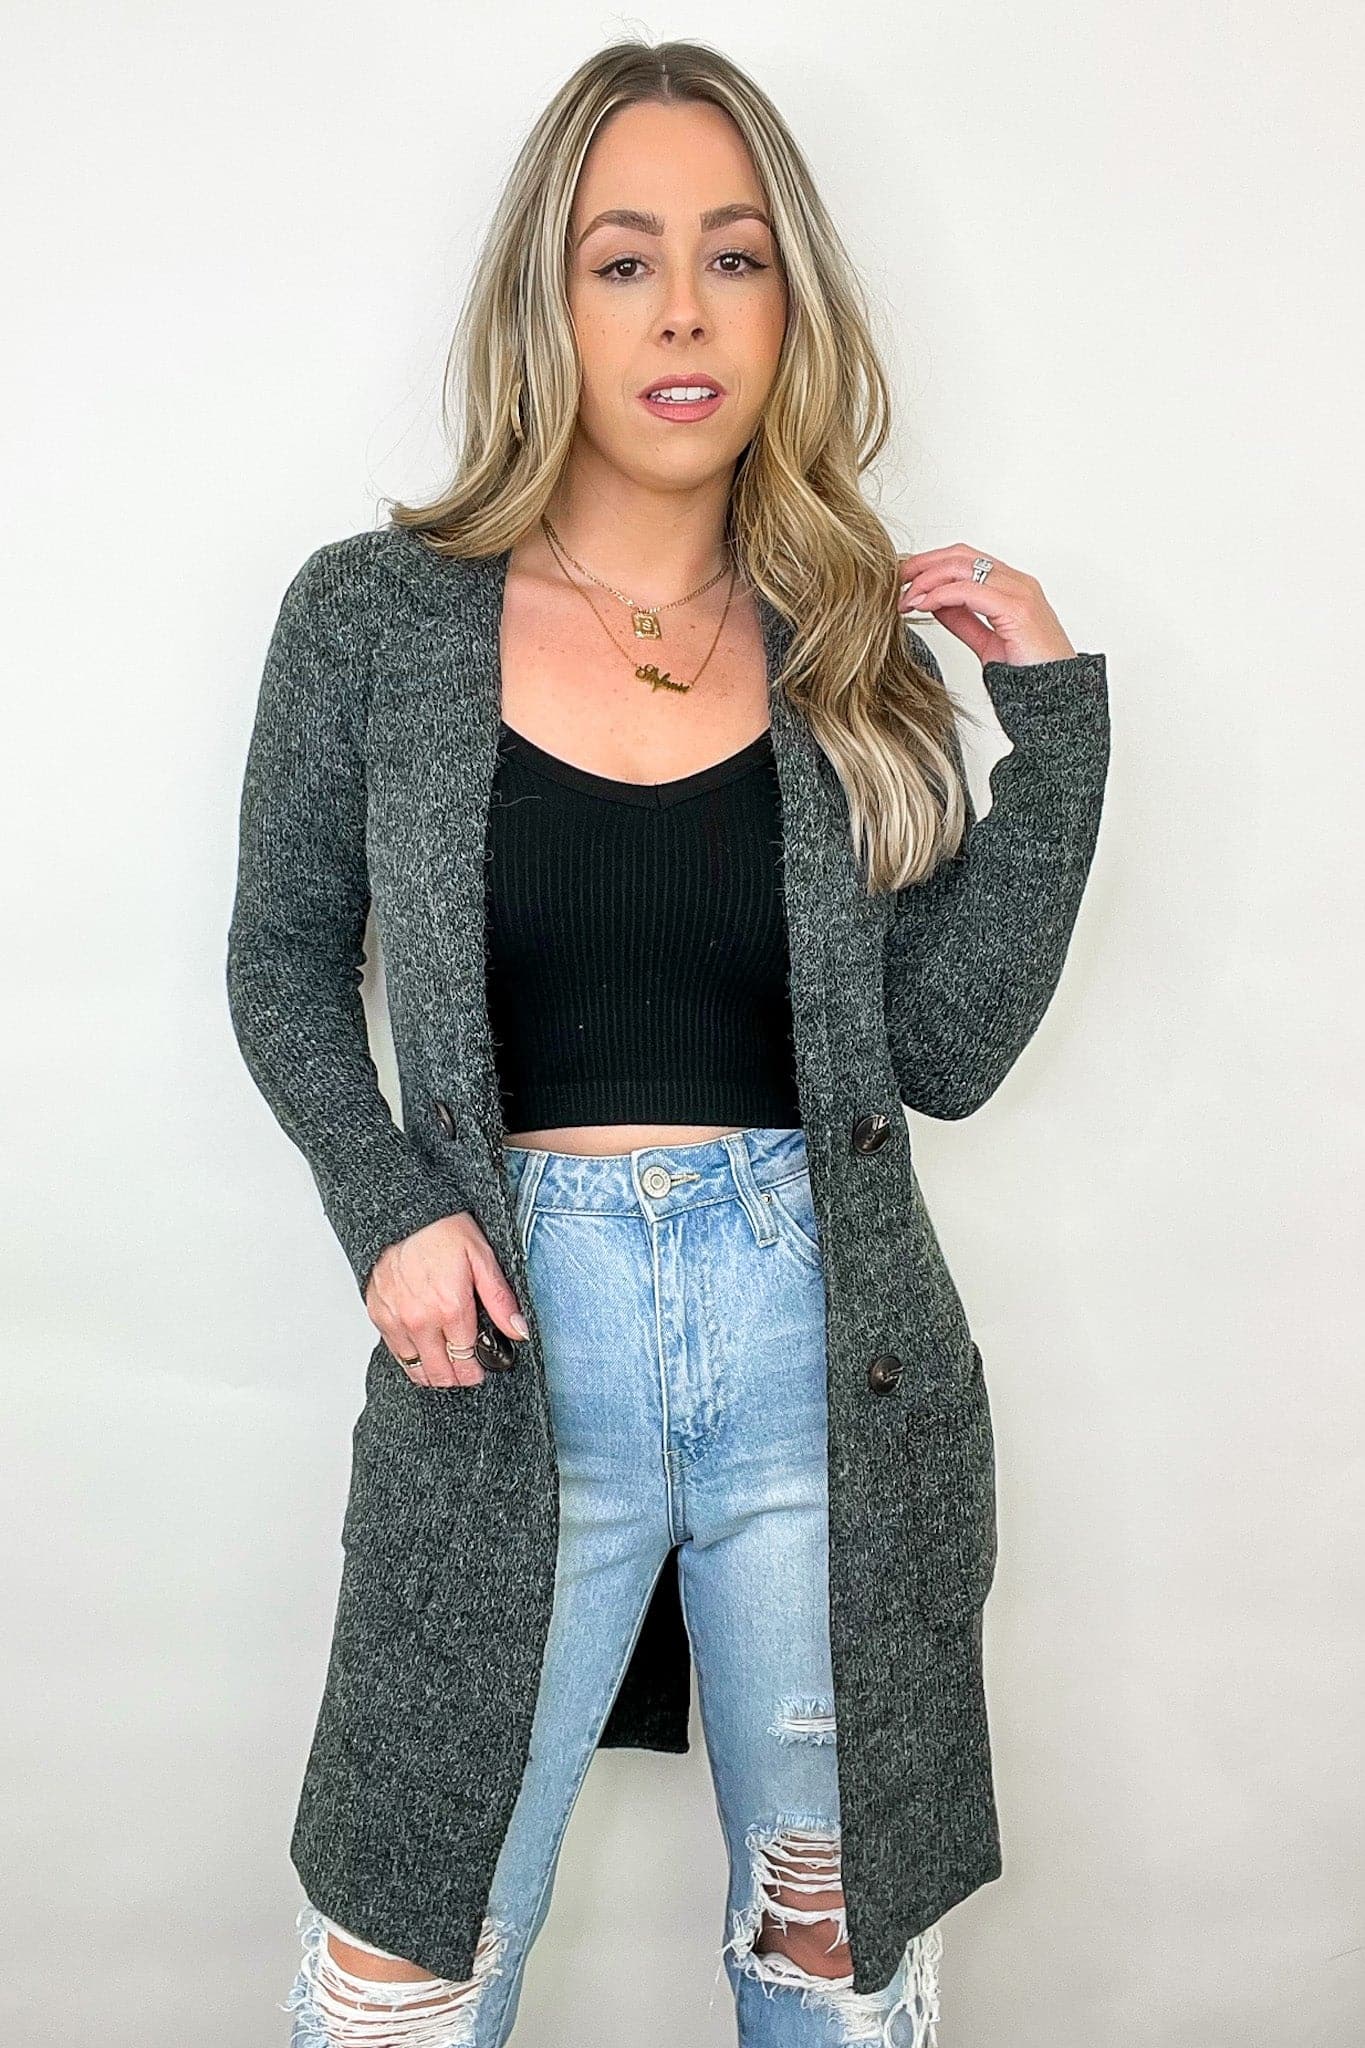  Trinitie Notched Knit Cardigan - FINAL SALE - Madison and Mallory